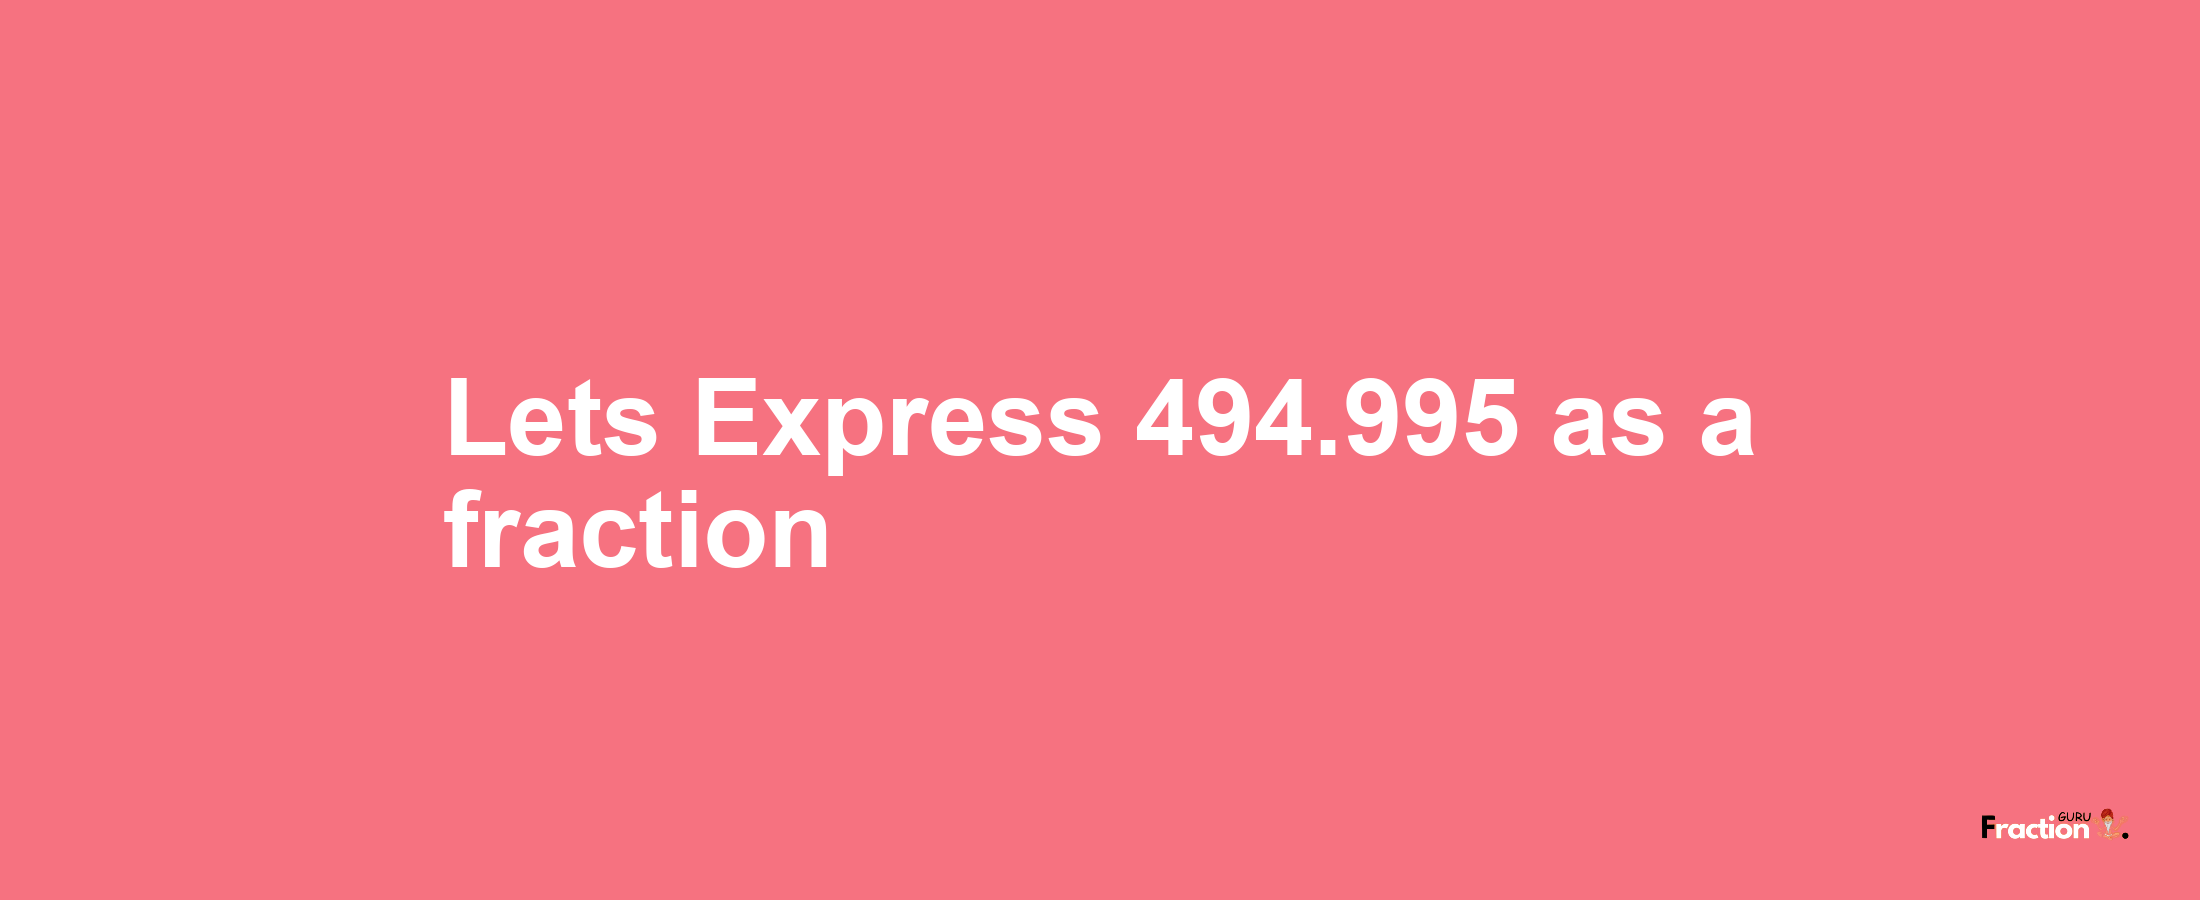 Lets Express 494.995 as afraction